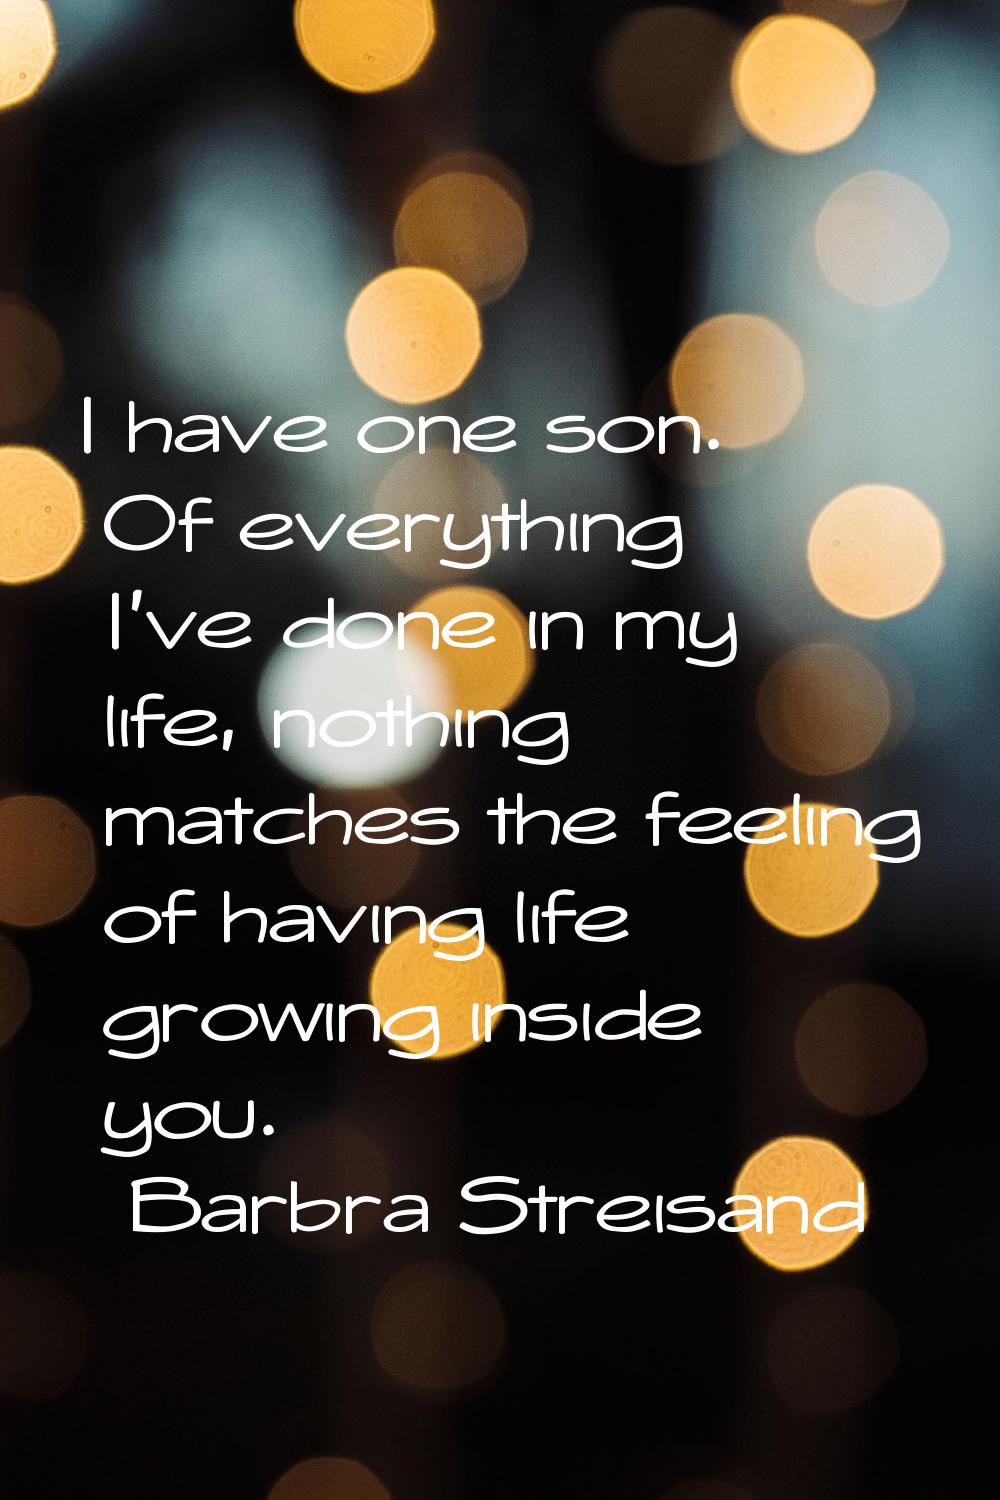 I have one son. Of everything I've done in my life, nothing matches the feeling of having life grow